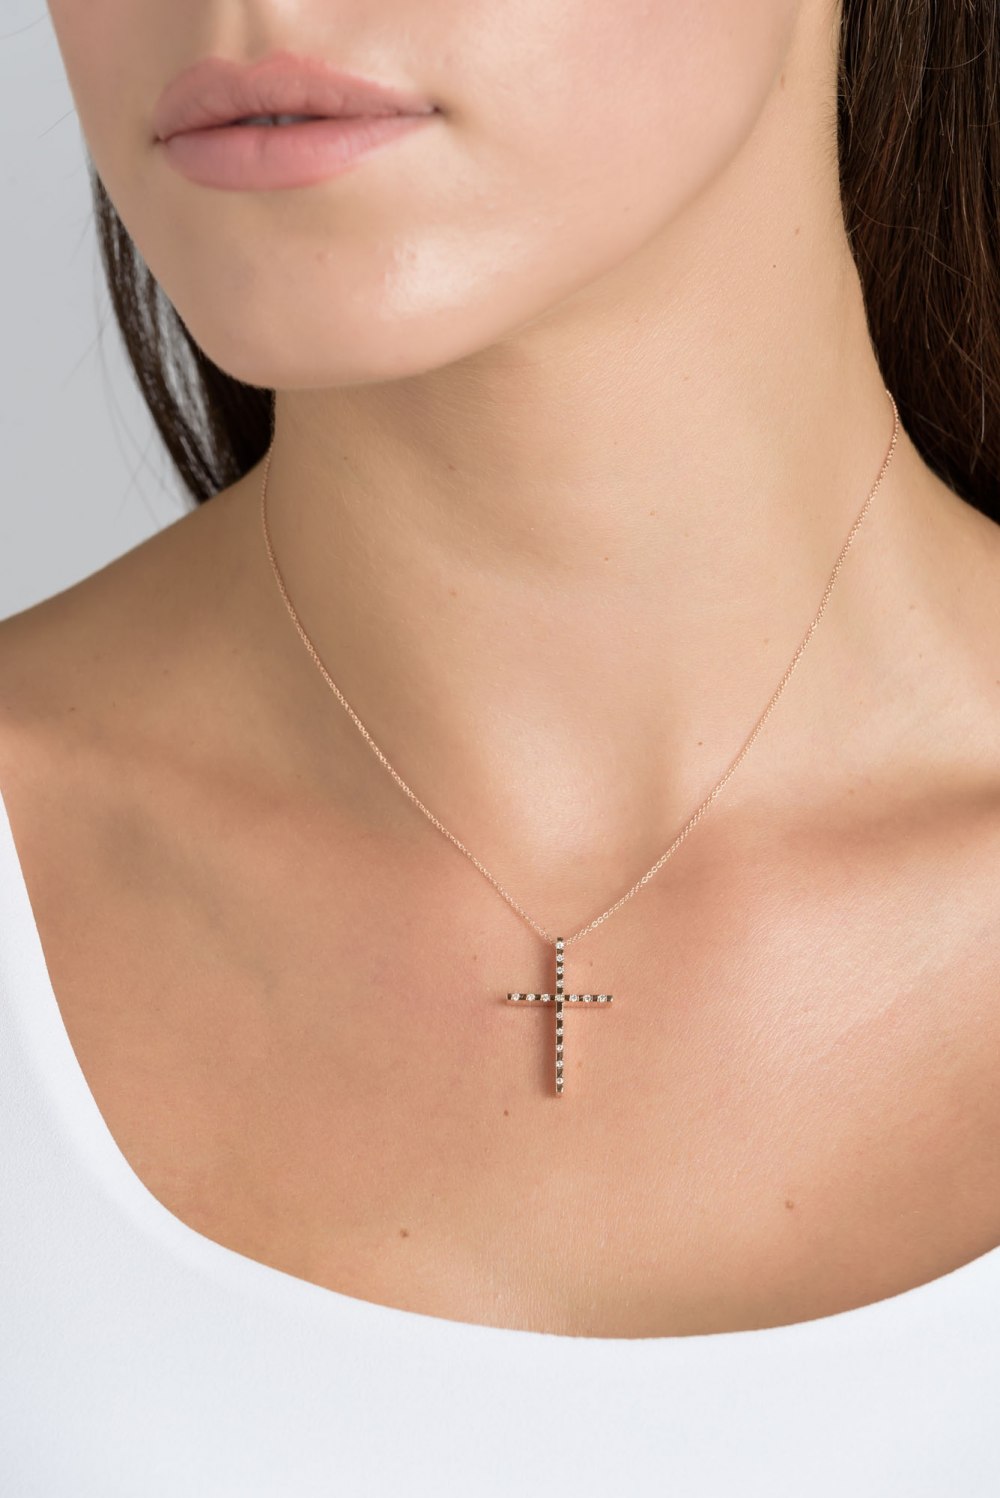 Bling Jewelry Cross Earring Pendant Necklace Rose Gold Plated .925 Sterling  Silver Jewelry Set - Walmart.com